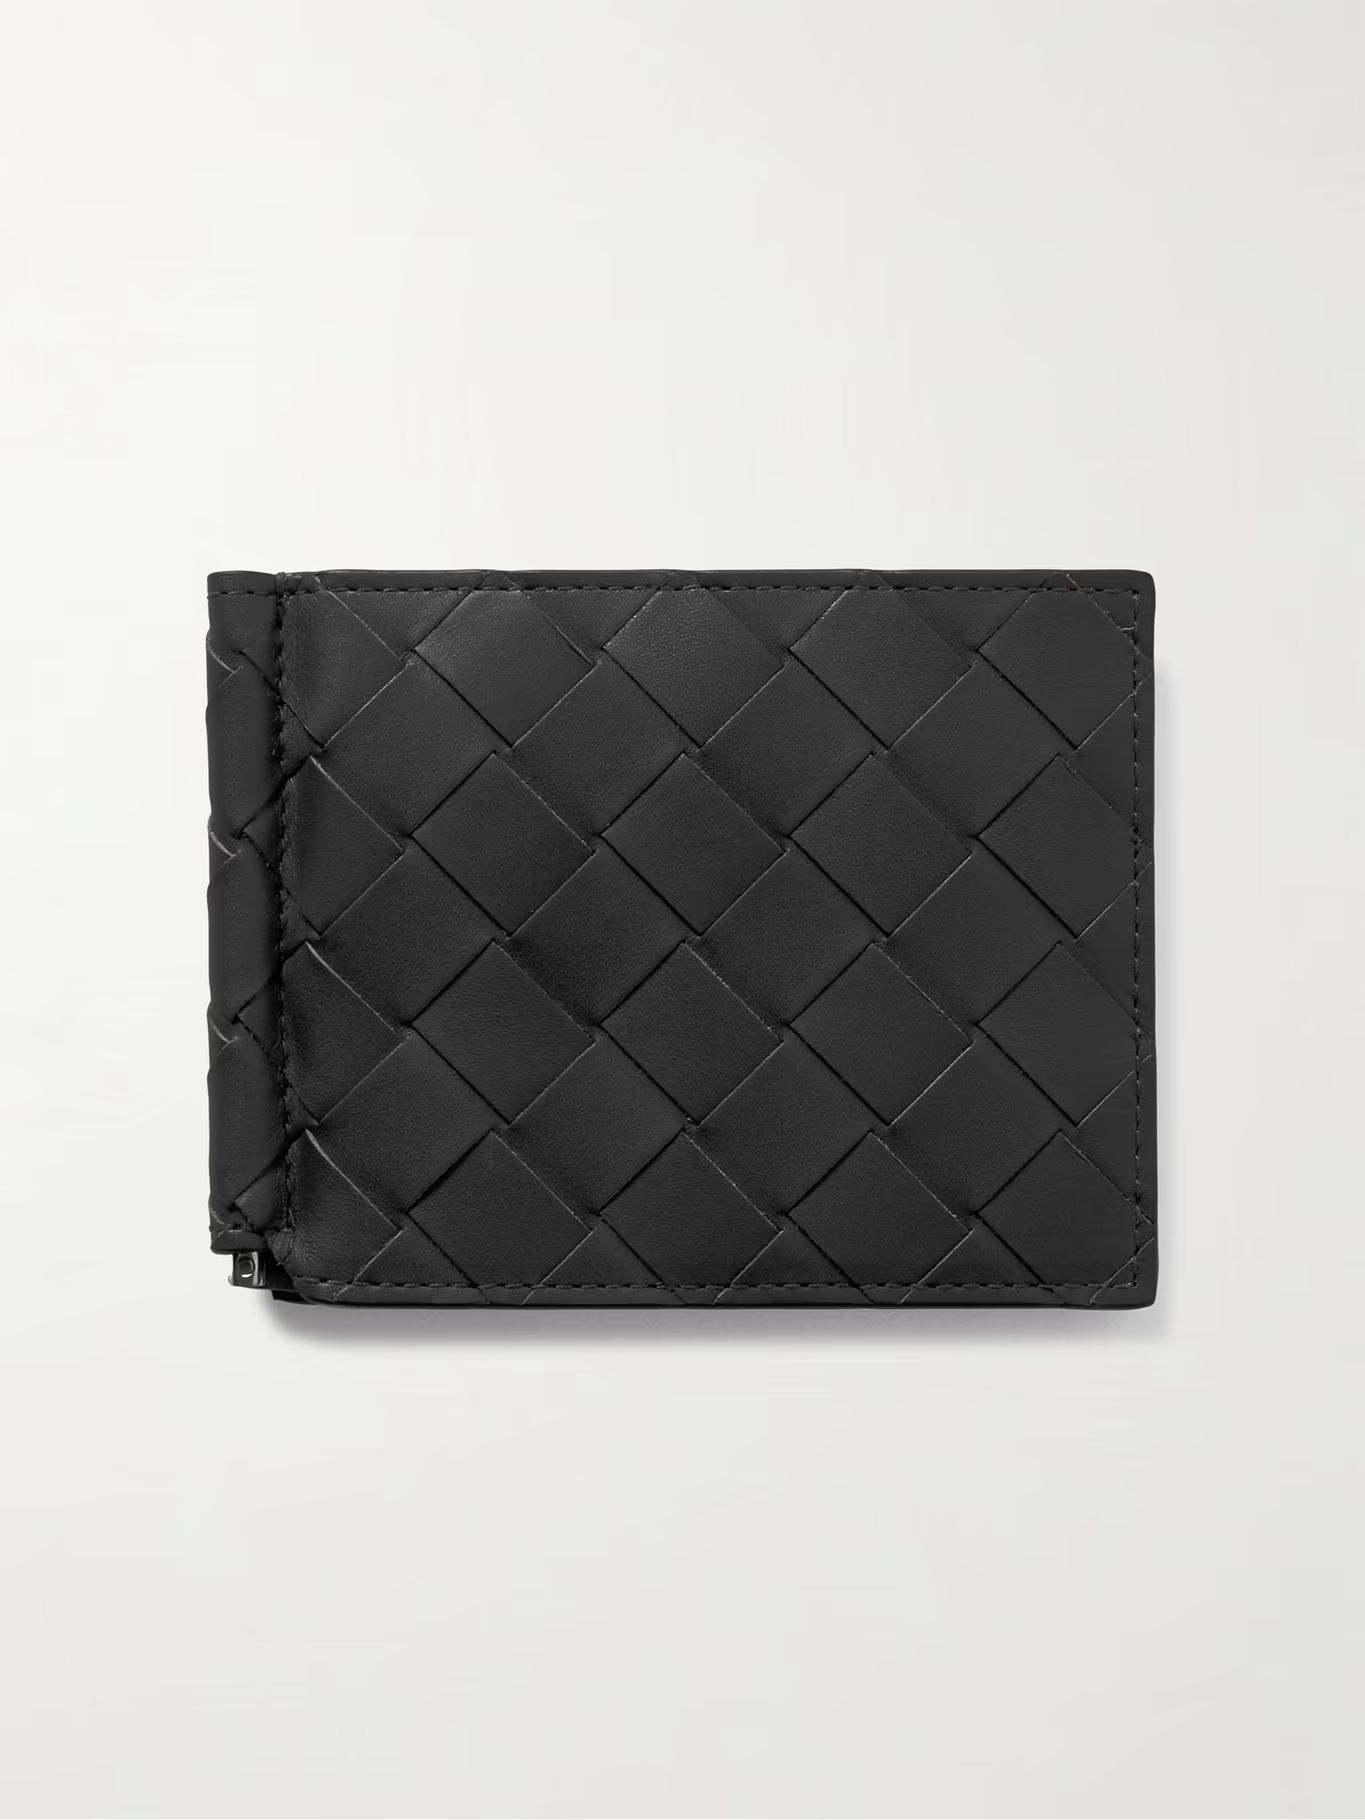 Intrecciato Leather Billfold Wallet with Money Clip | Mr Porter (US & CA)